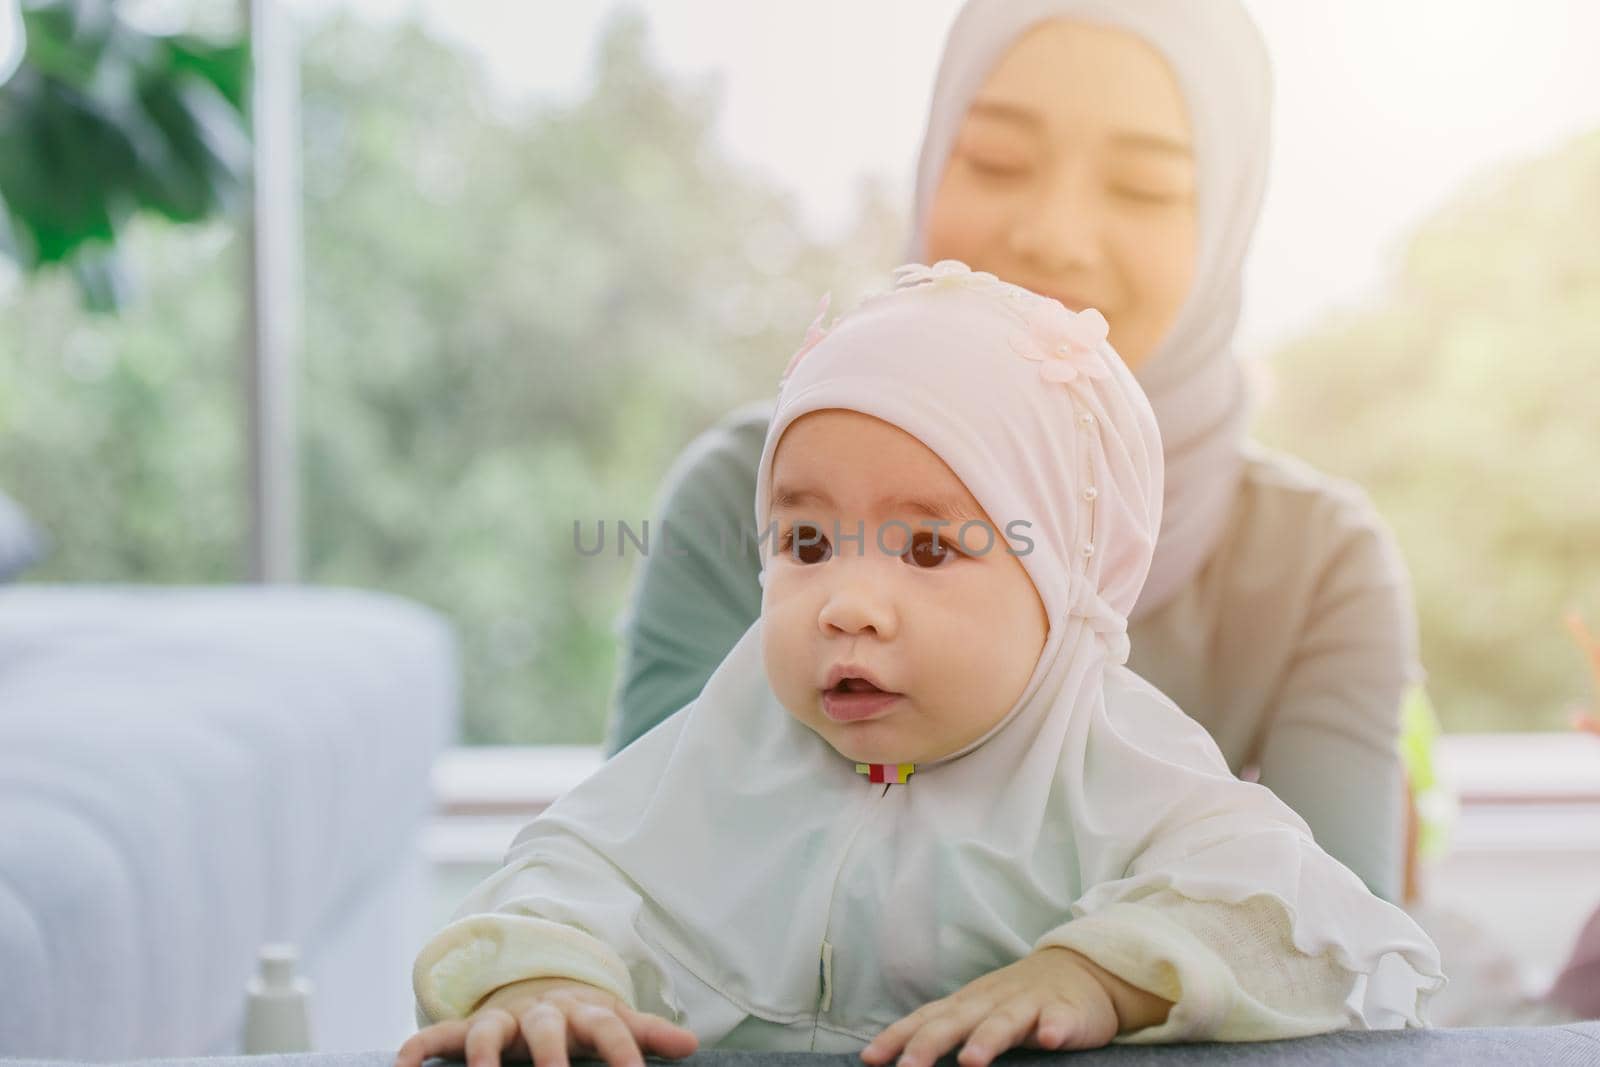 Muslim Mother look at her baby happy smiling infant home care together cute lovely childhood indoor. by qualitystocks